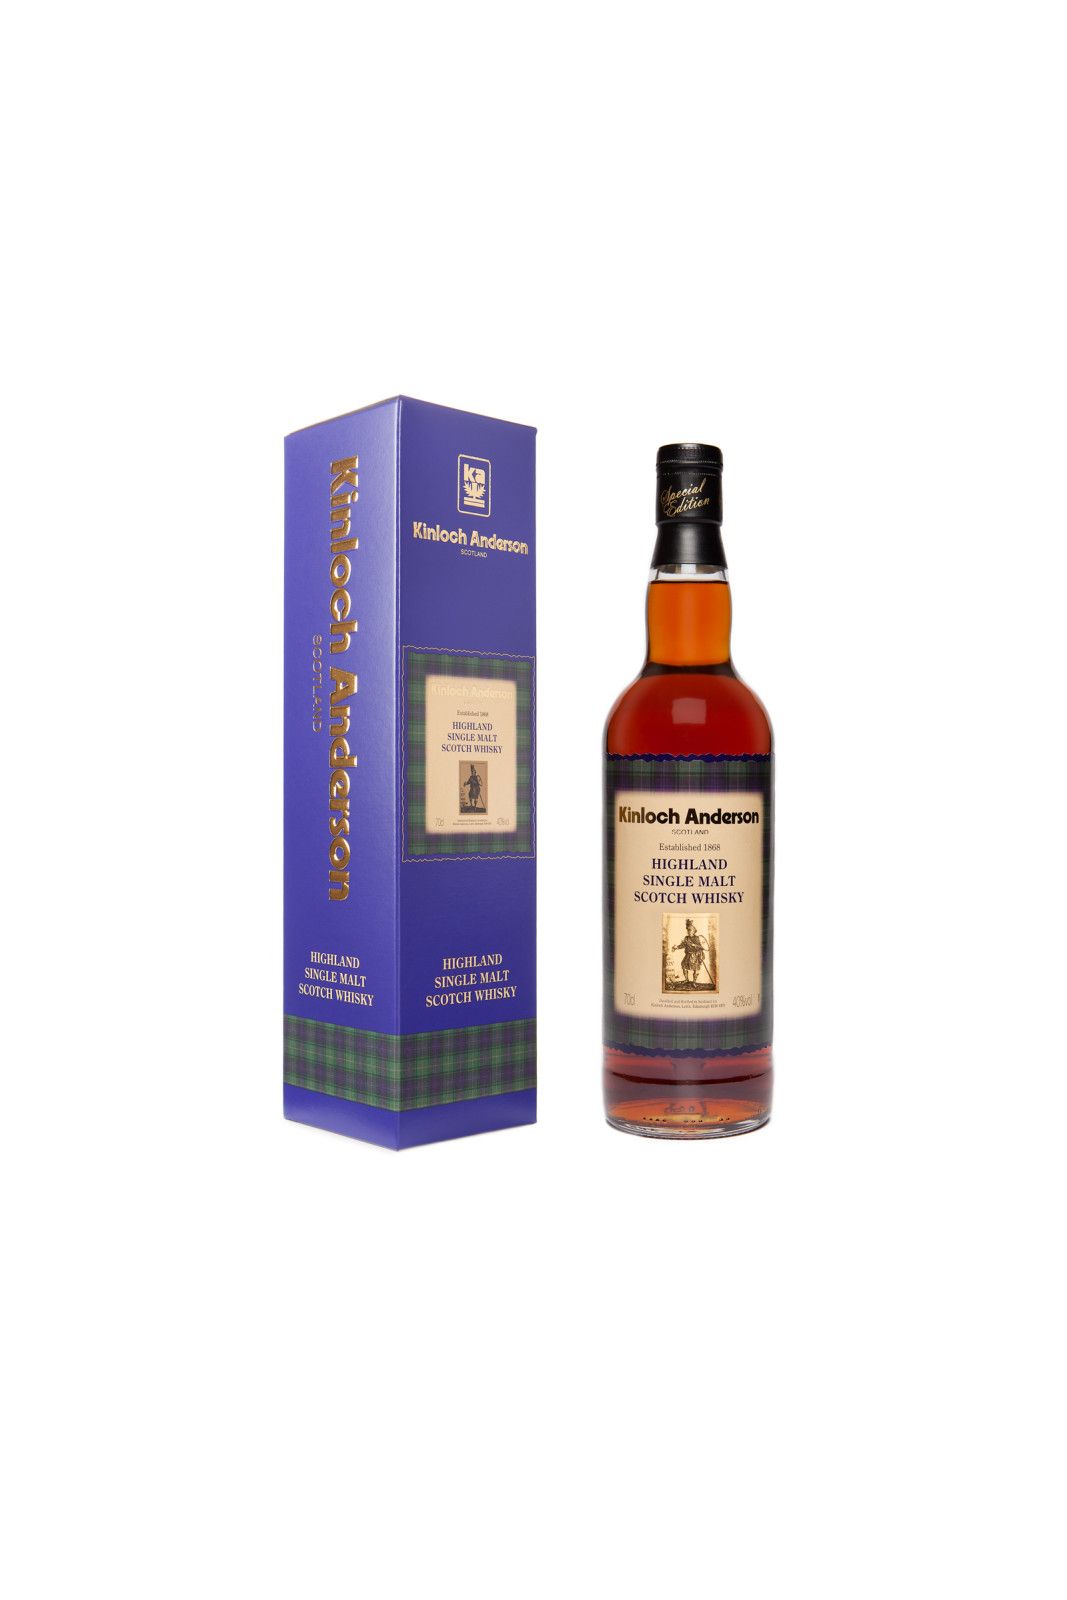 Kinloch Anderson Highland Single Malt Scotch Whisky - REDUCED TO CLEAR